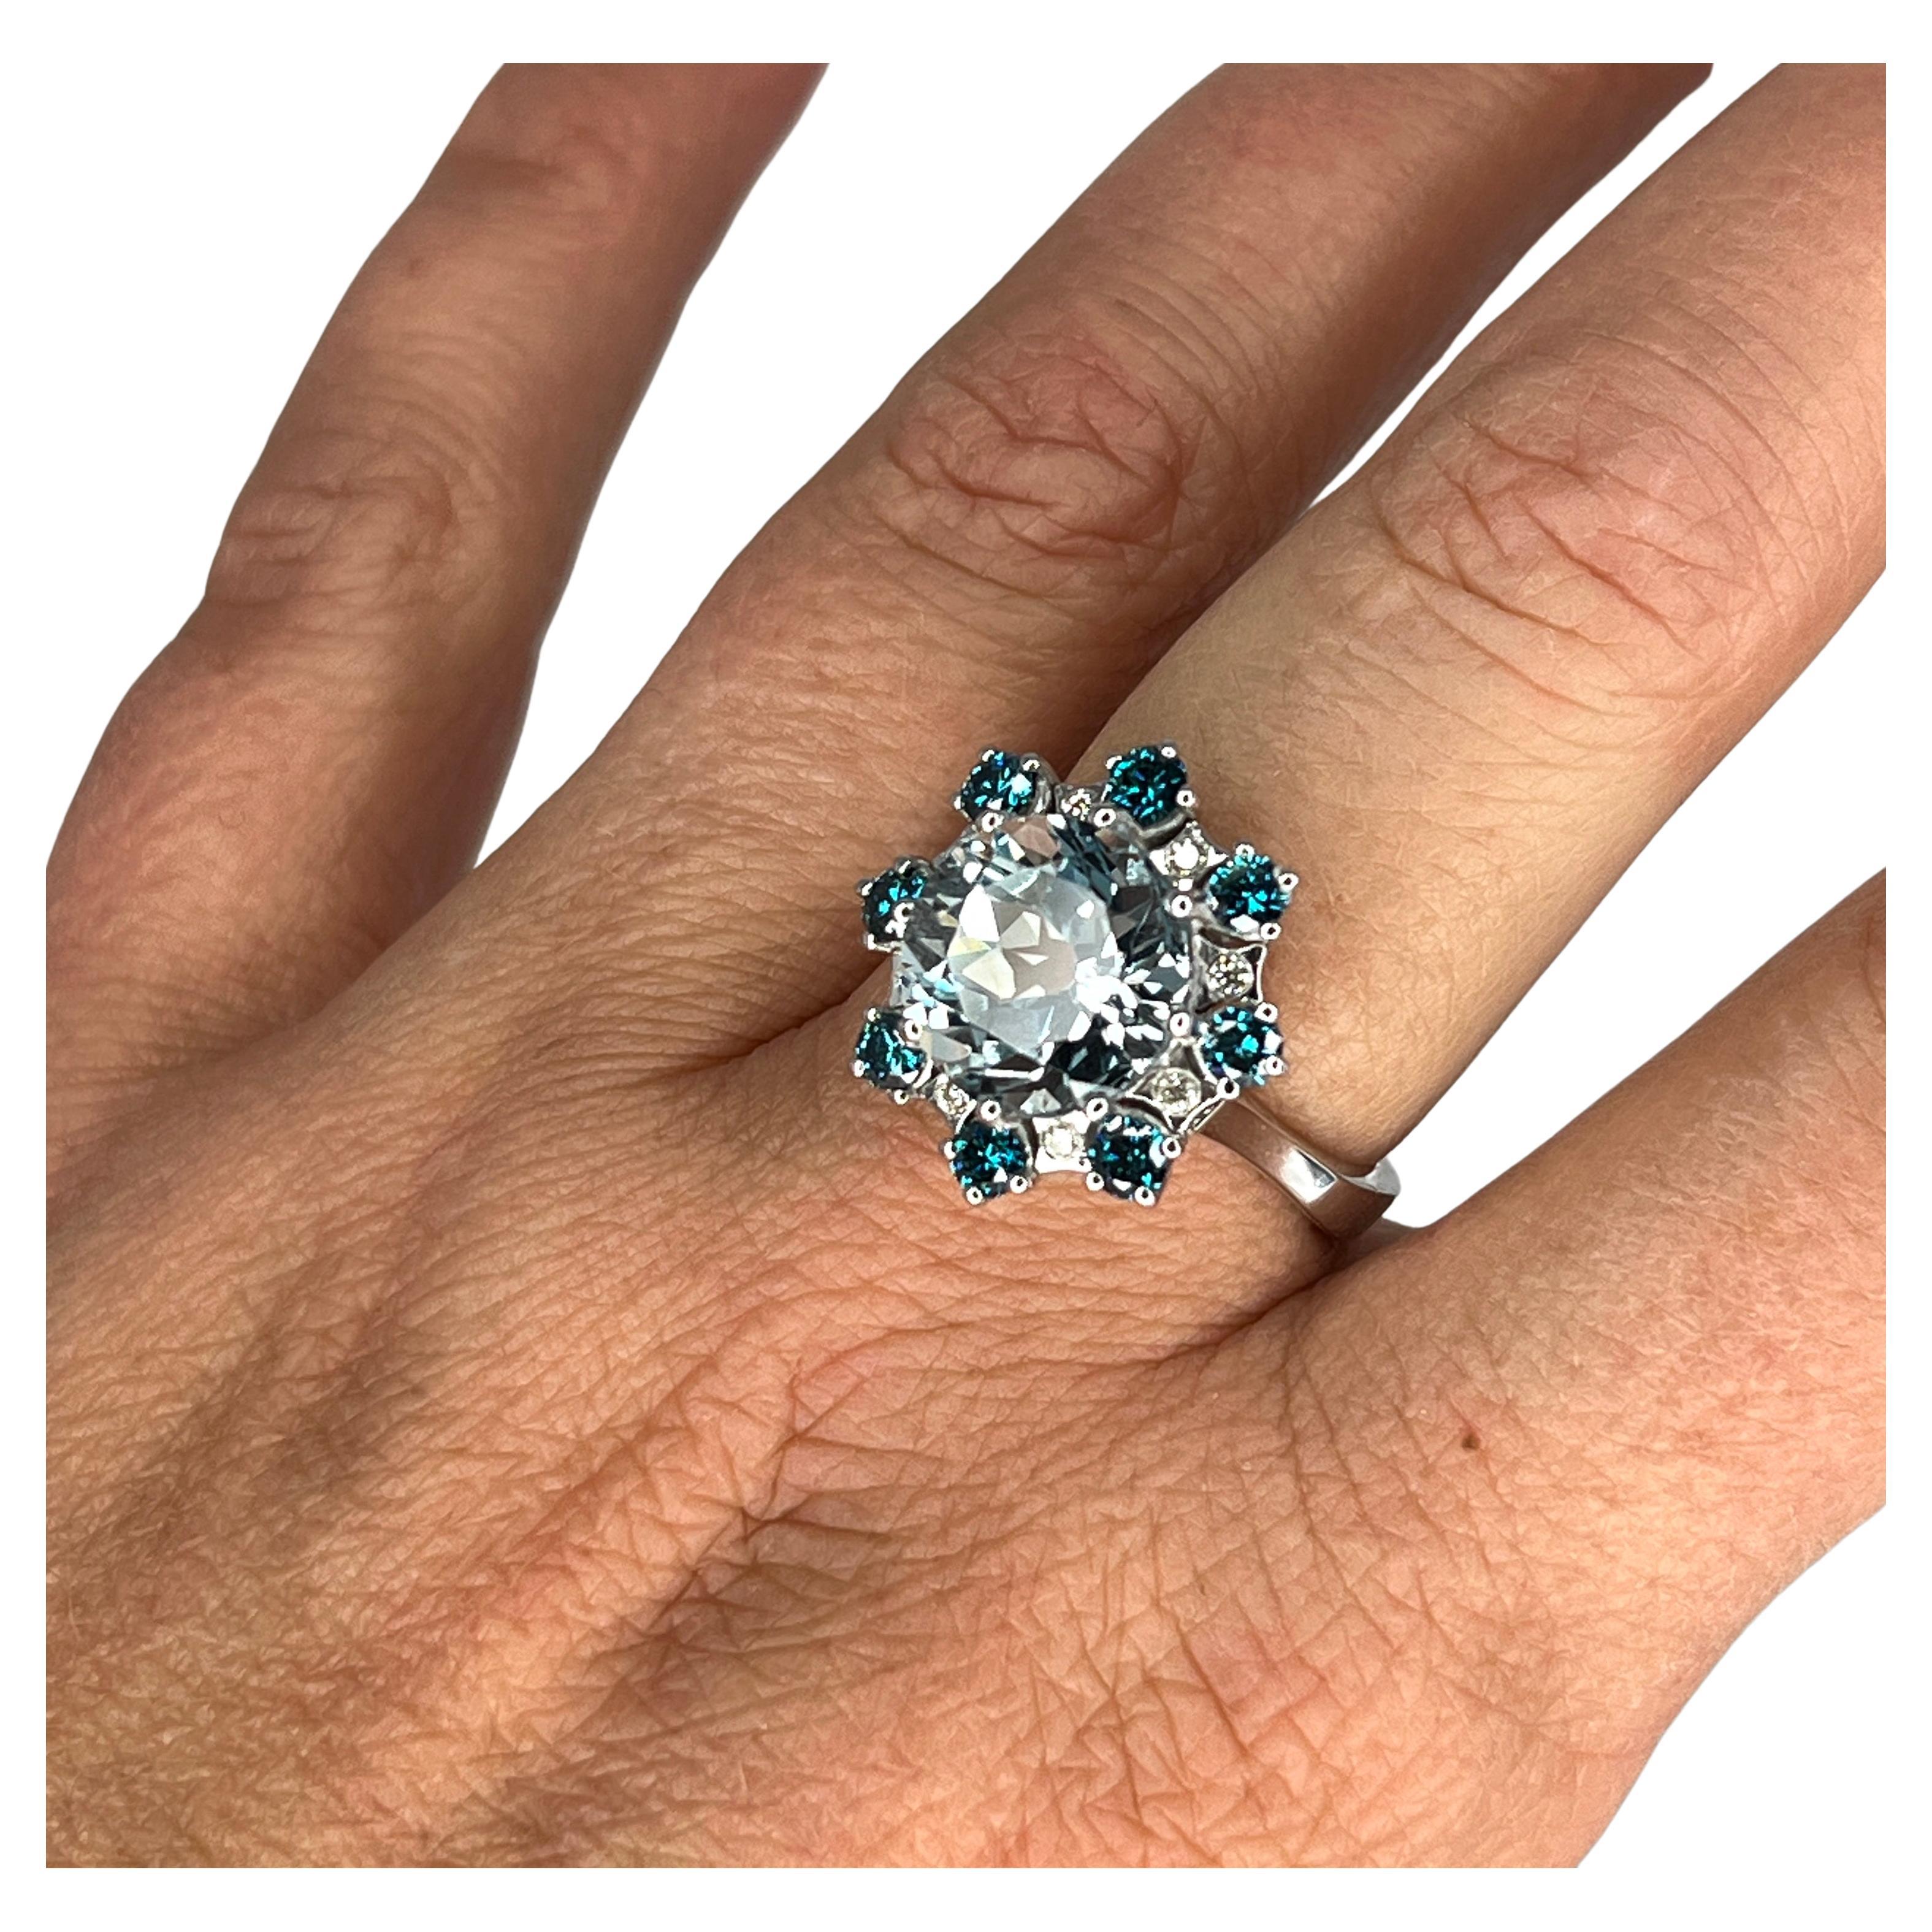 This Engagement ring from S.Georgios designer features 5.17 Carats Aquamarine center complemented by 0.10 Brilliant cut White Diamonds and 0.76 Carat of Brilliant cut Blue Diamonds. It was handmade from 18 Karat White gold in our workshop in Greece.